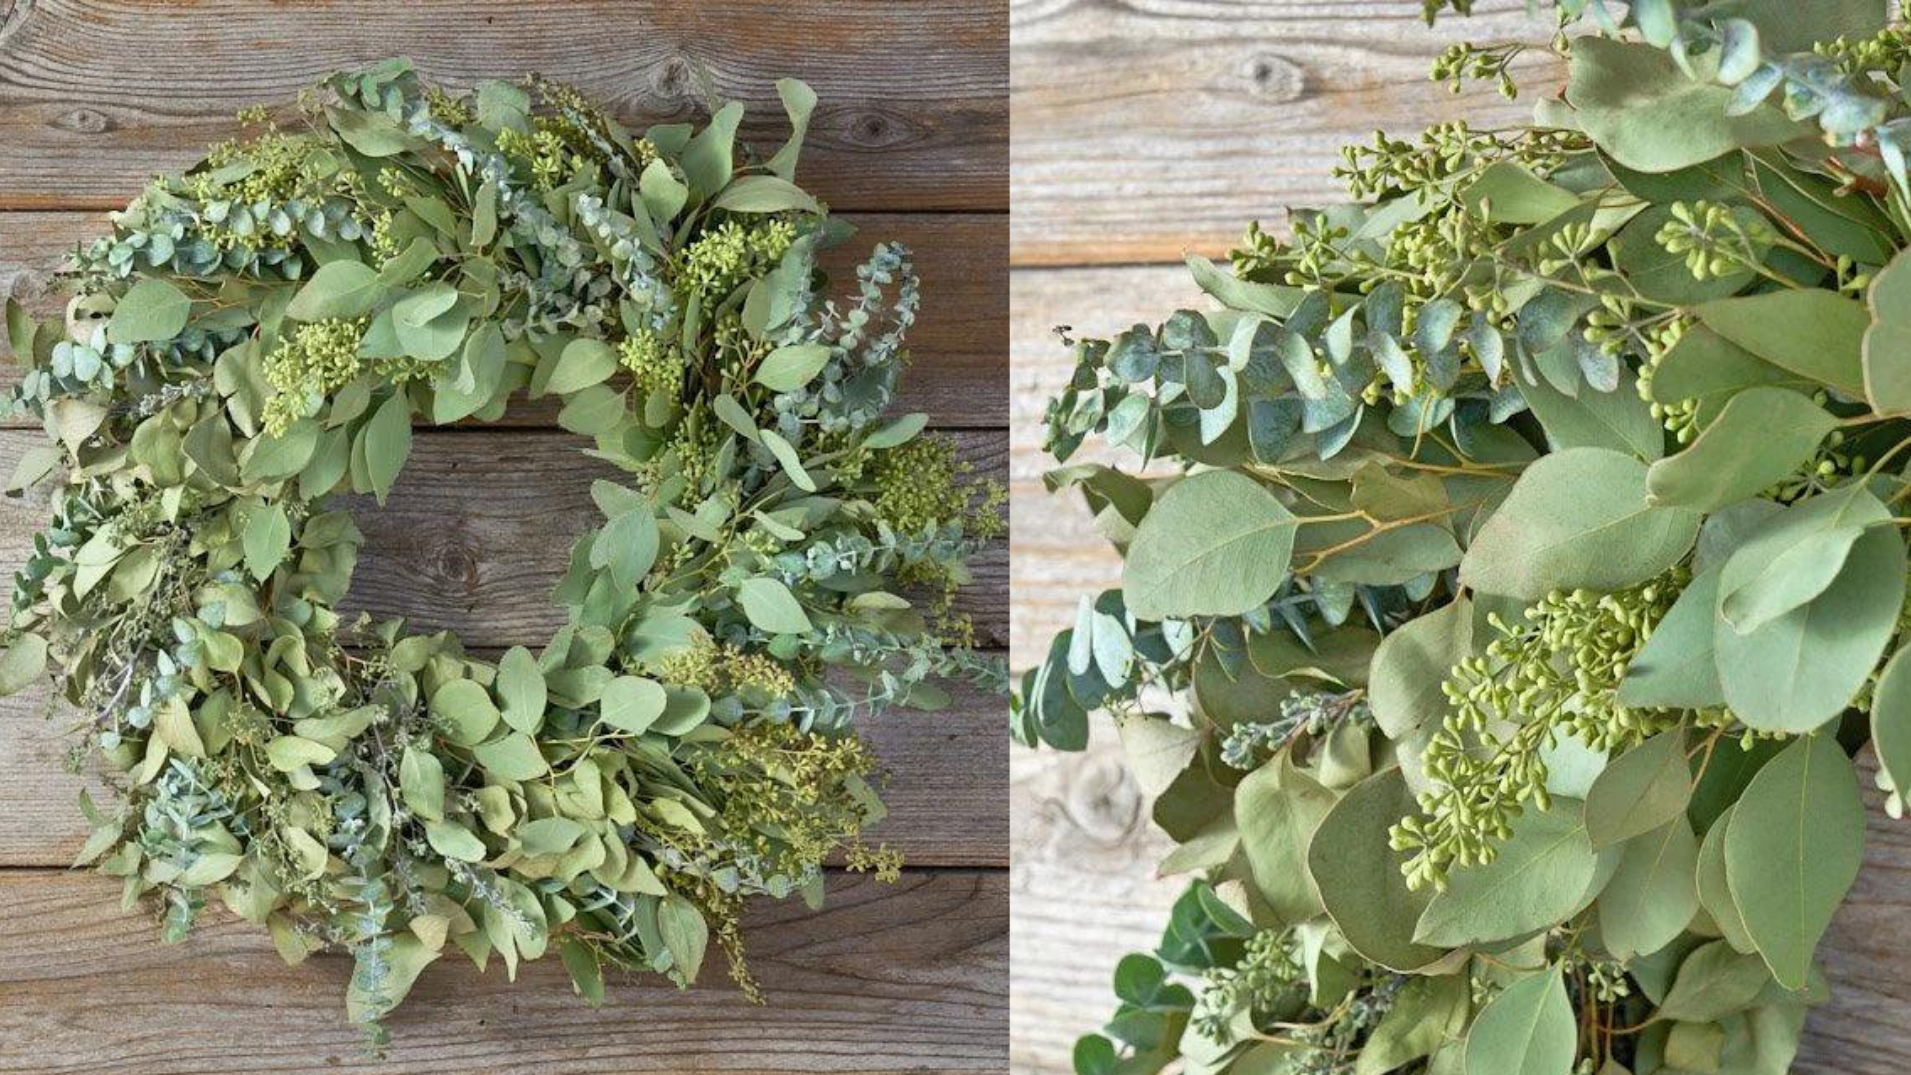 While this wreath may appear to be plain upon first glance, its aromatic scent of cooling eucalyptus will be sure to surprise you!